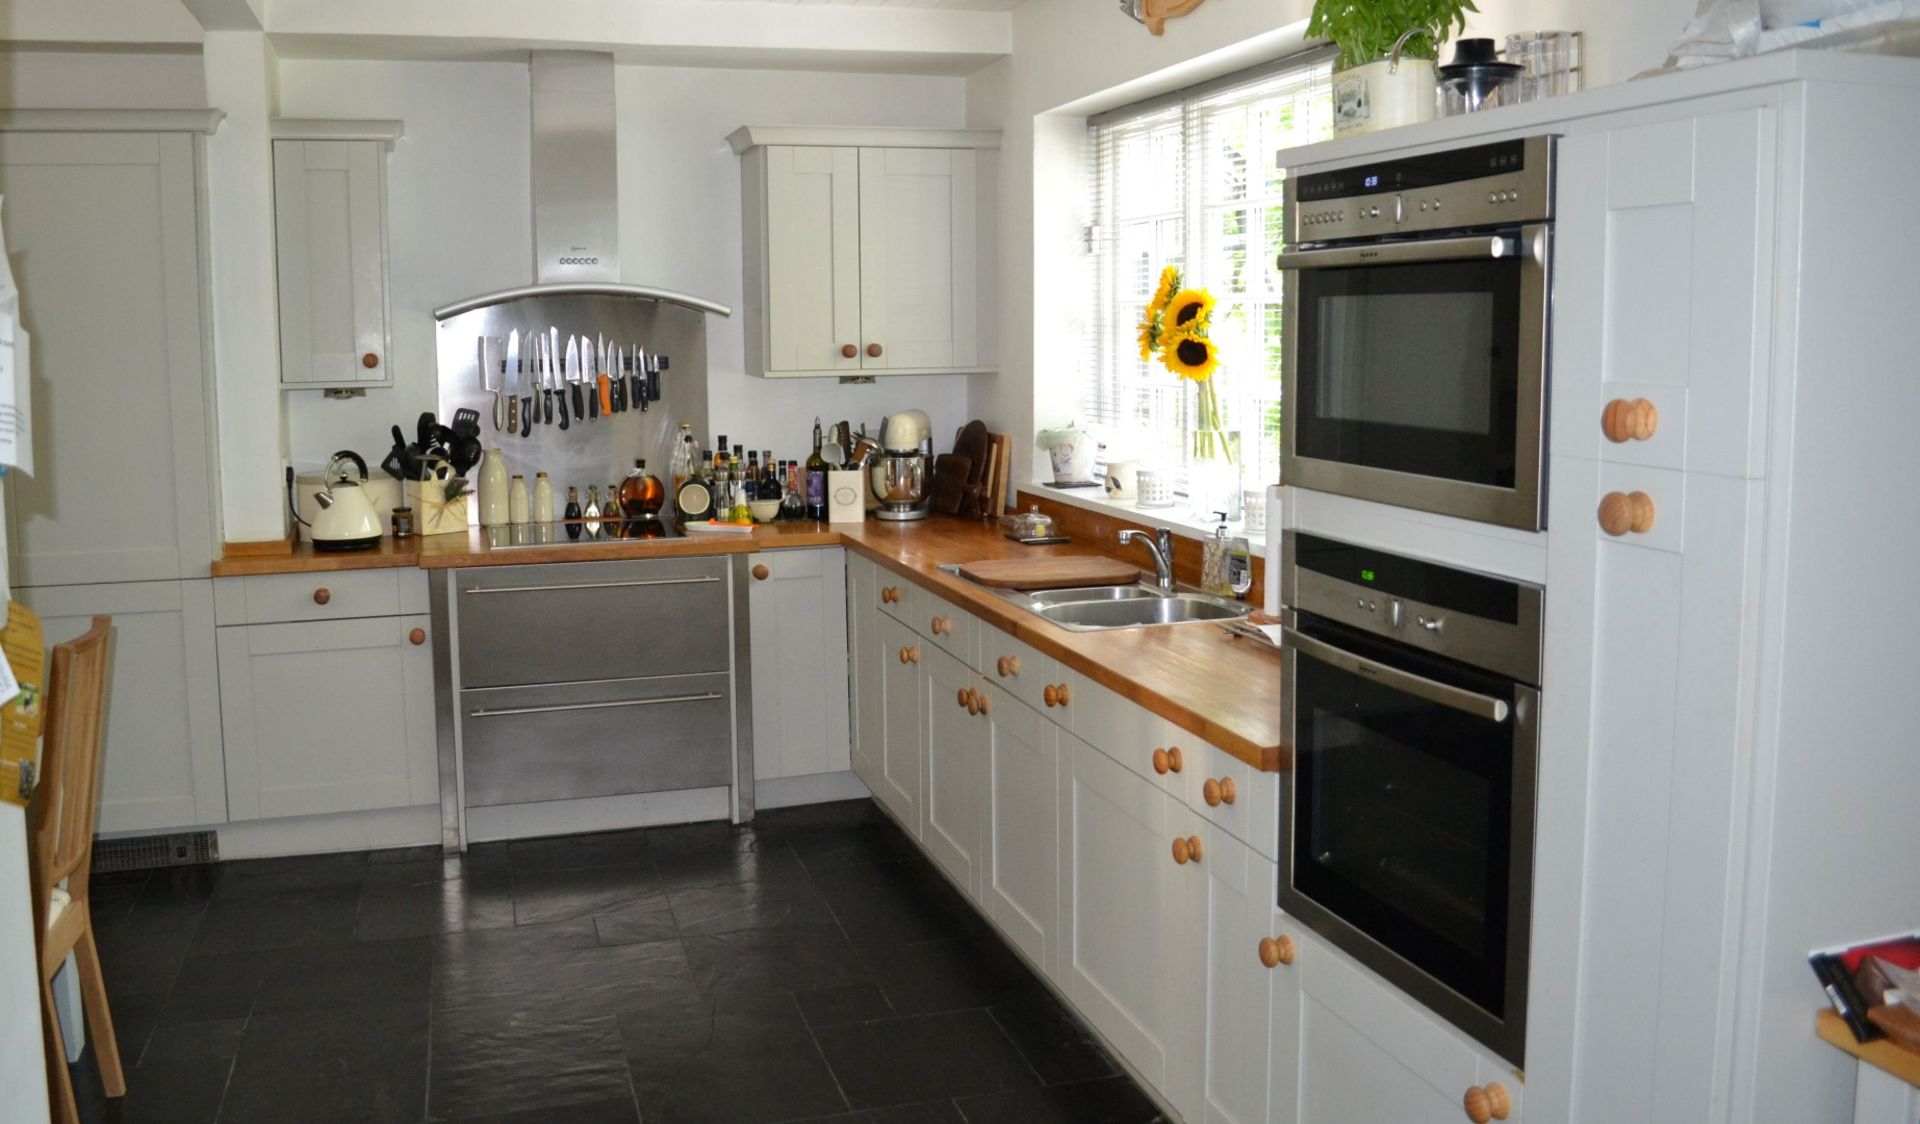 1 x Large Bespoke Fitted Kitchen With Neff Appliances - CL321 - Location: - Image 57 of 59